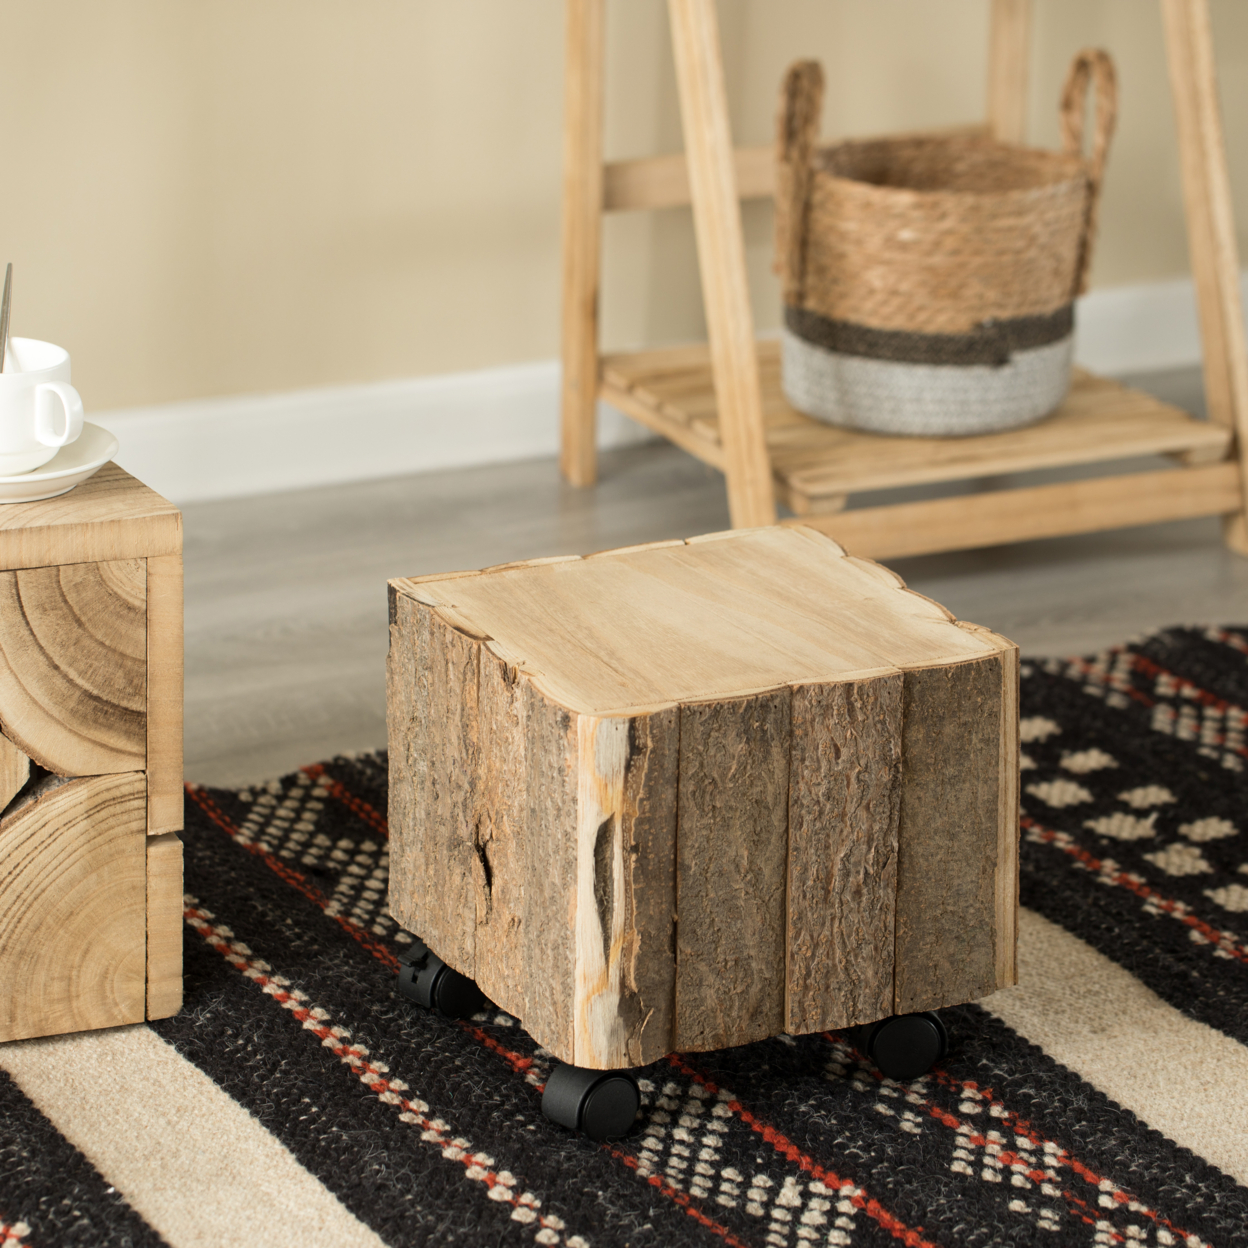 Accent Decorative Natural Wooden Square Stump Stool, With Wheels For Indoor And Outdoor